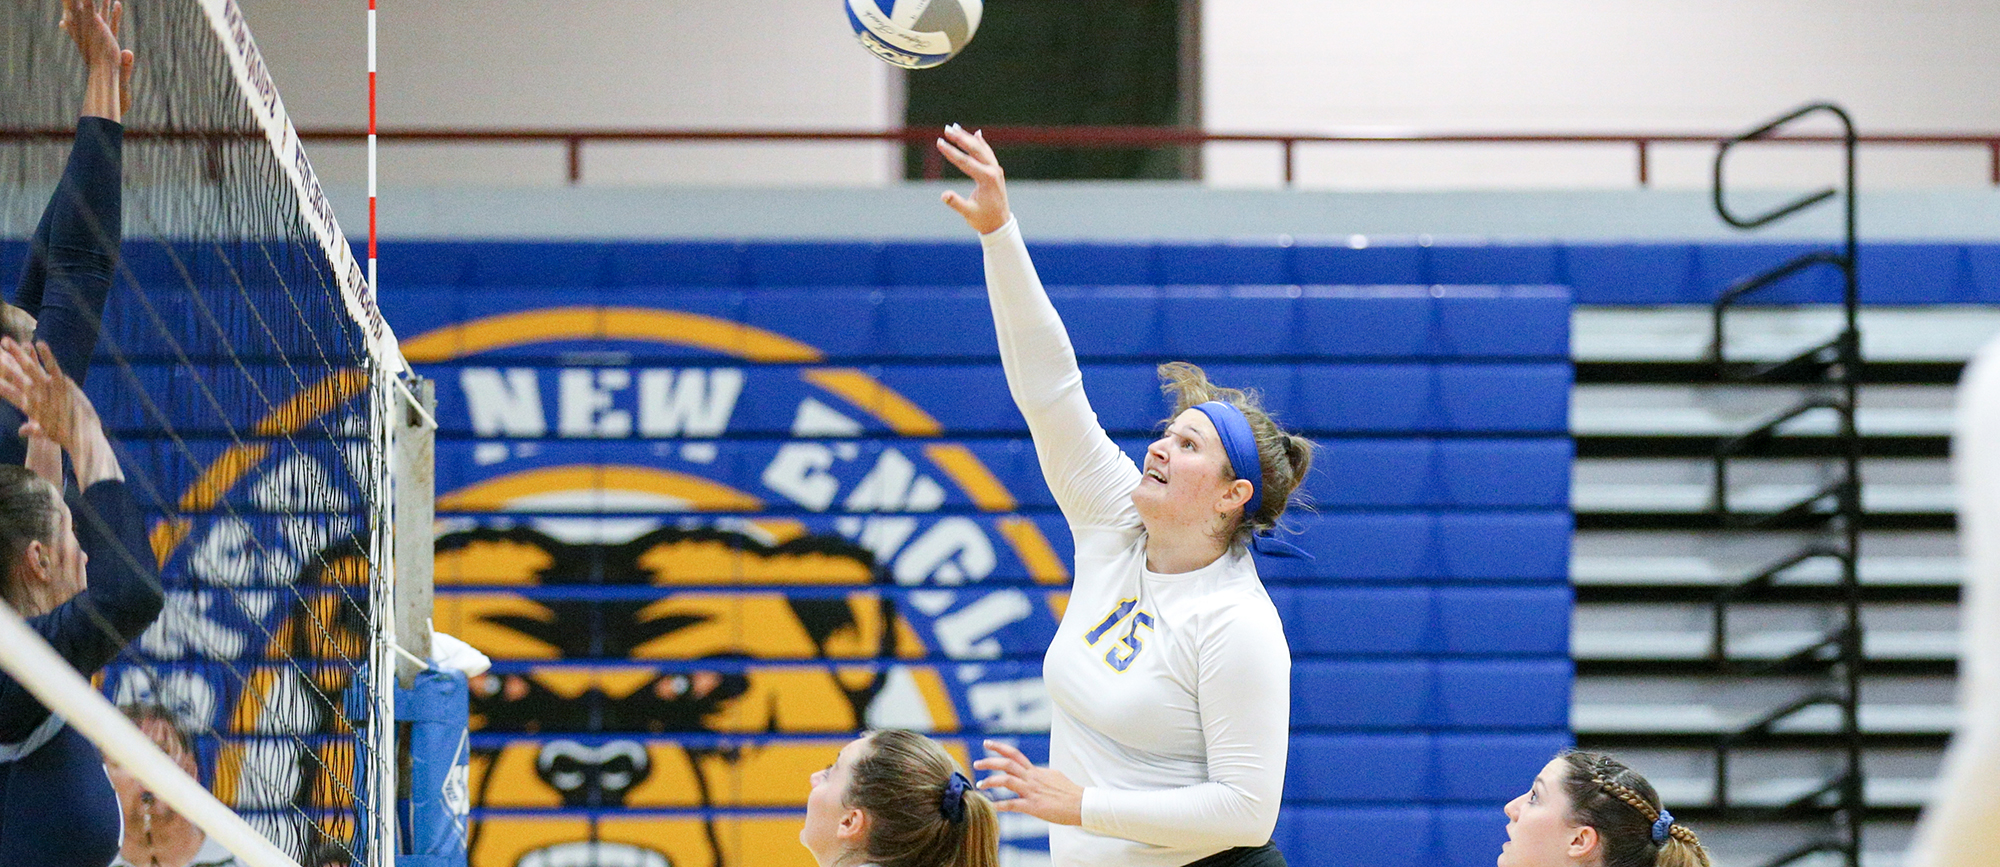 Sophomore Toni Fiore established a new career-high with ten kills in Western New England's 3-1 loss to Roger Williams on Saturday. (Photo by Chris Marion)